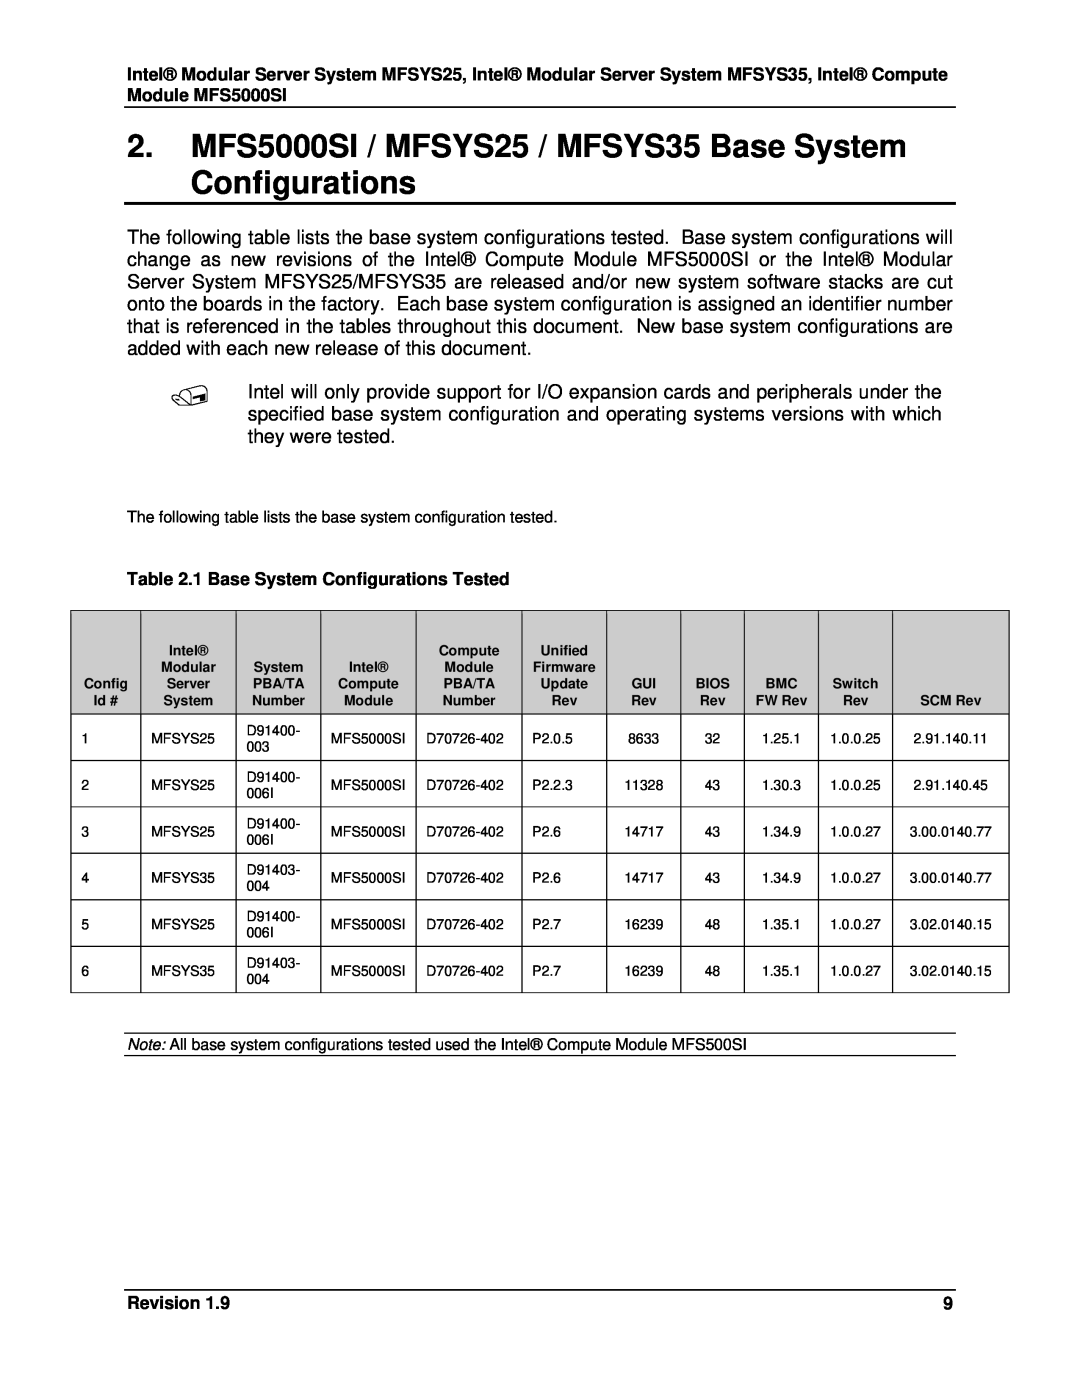 Intel MFSYS25, MFS5000SI, MFSYS35 manual 1 Base System Configurations Tested, Revision 